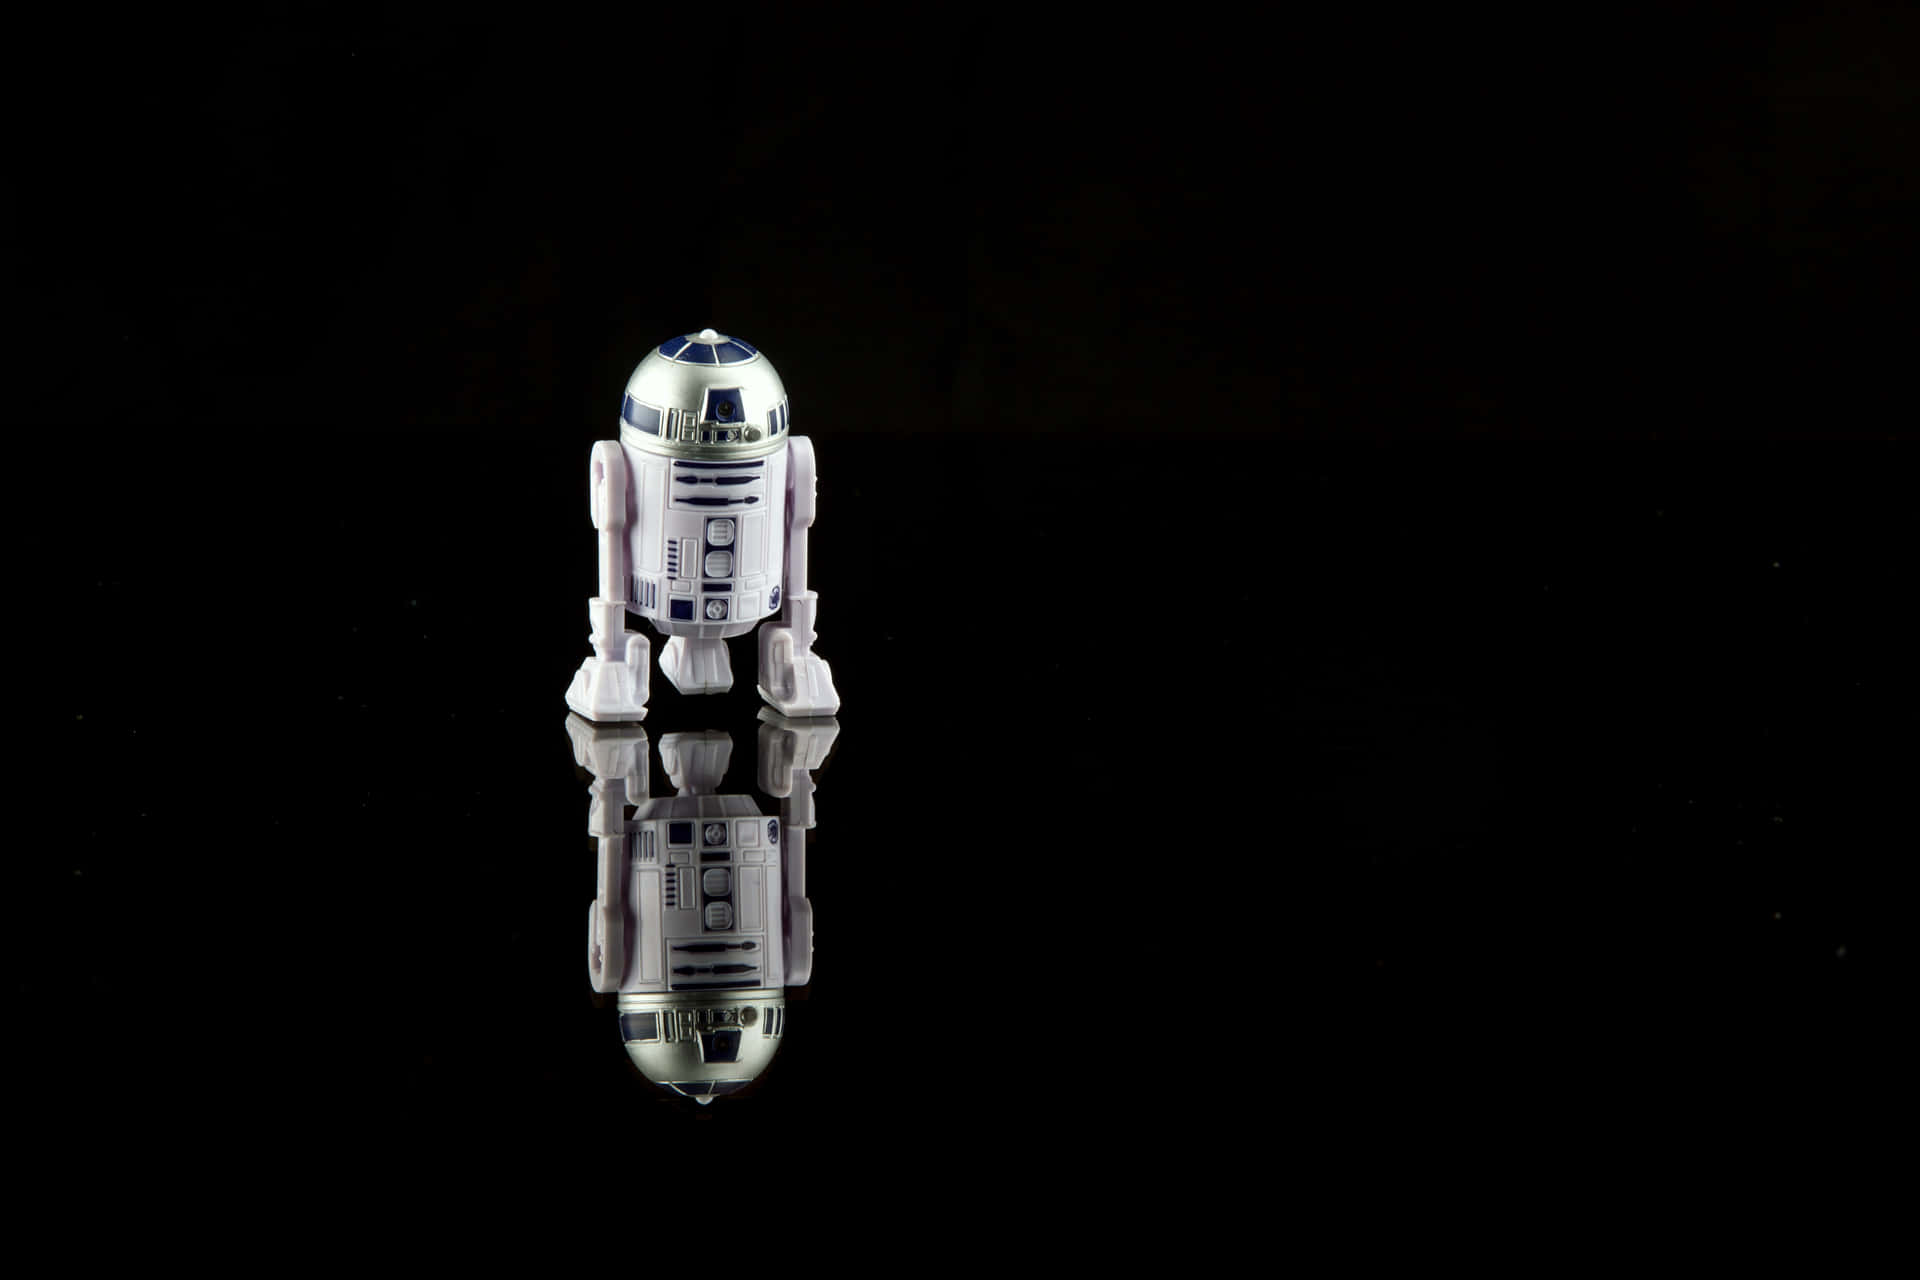 The Iconic R2d2 From Star Wars Background